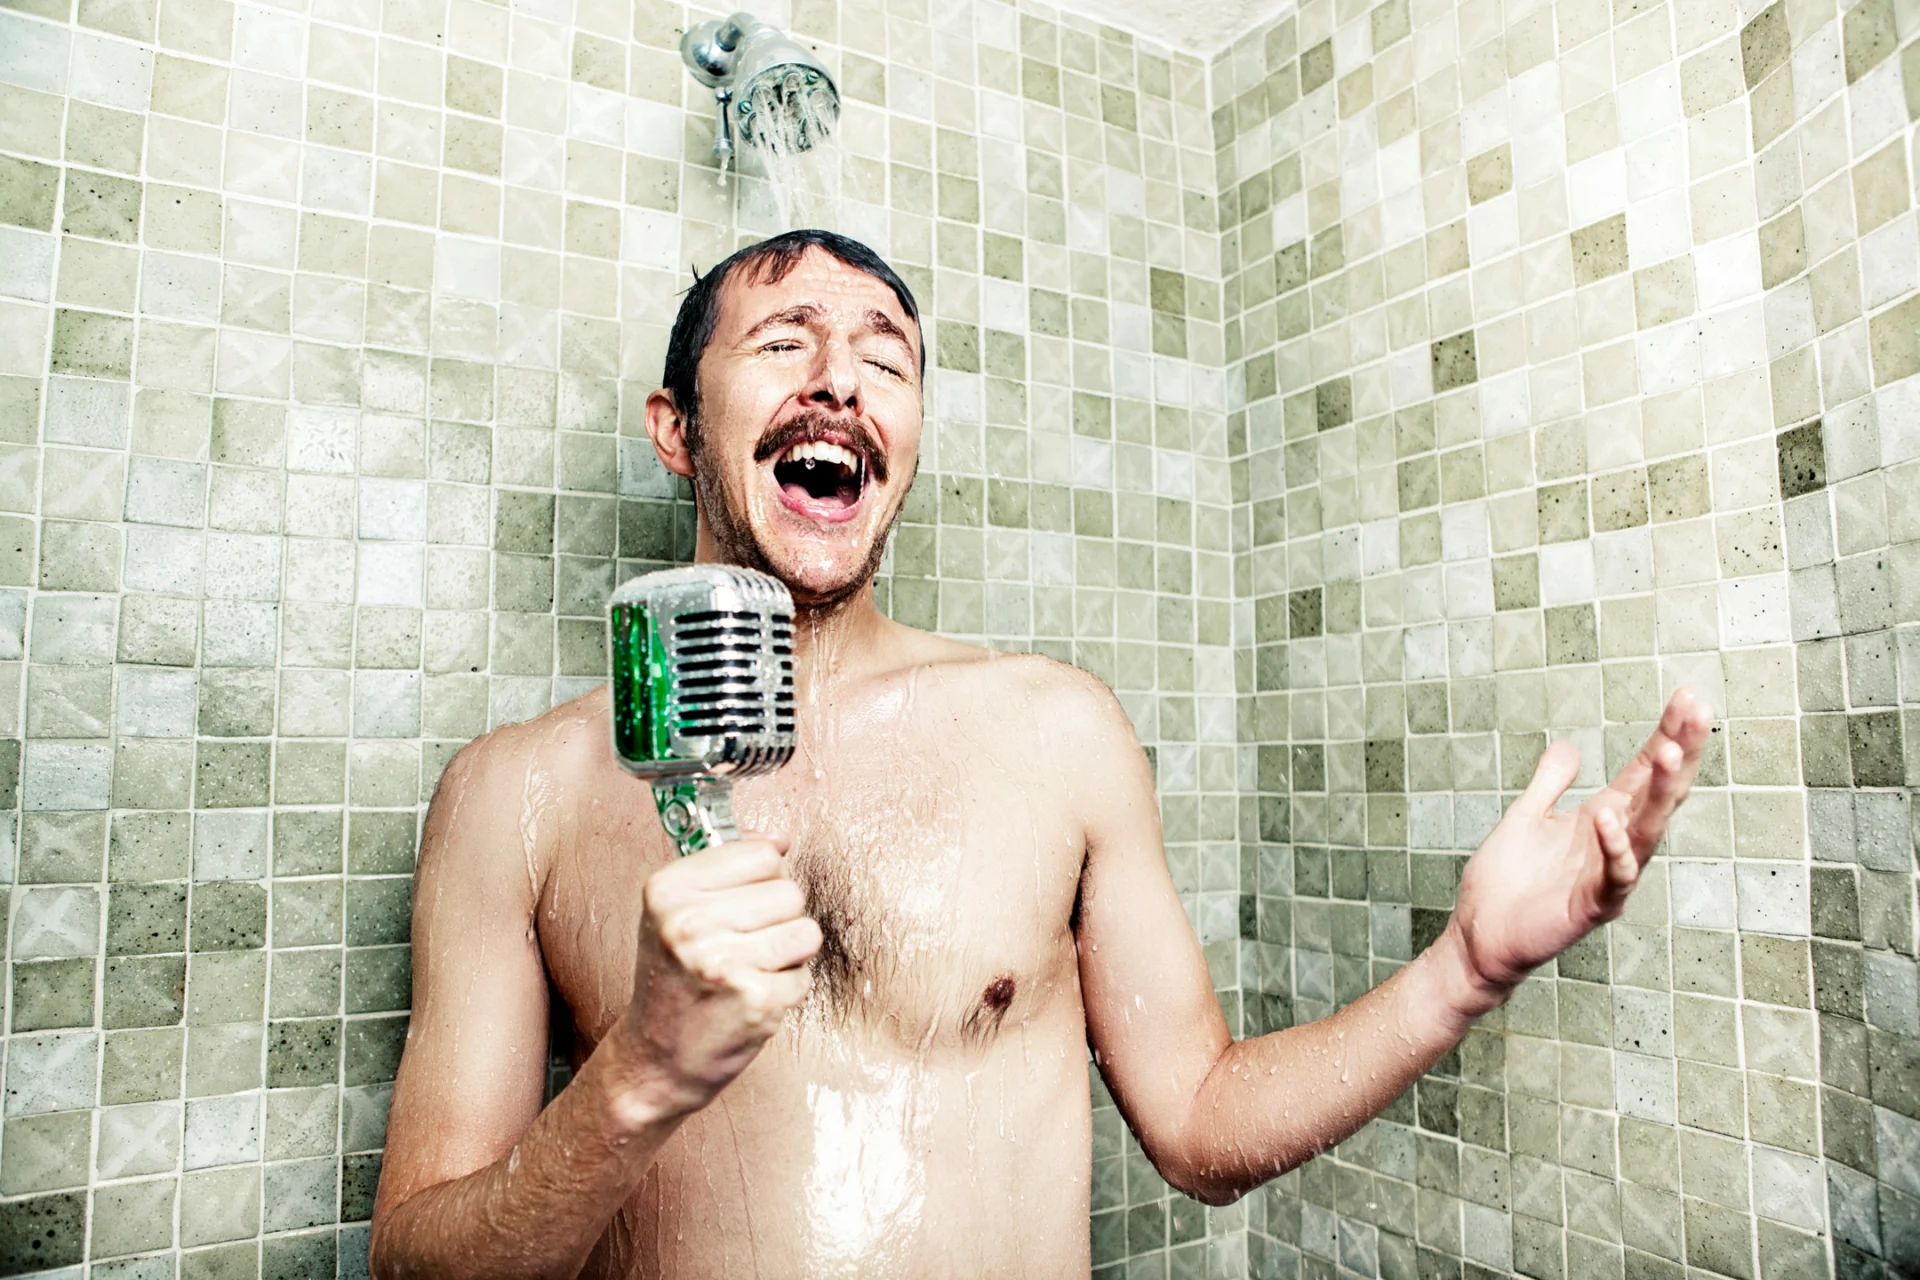 A man is singing in the shower